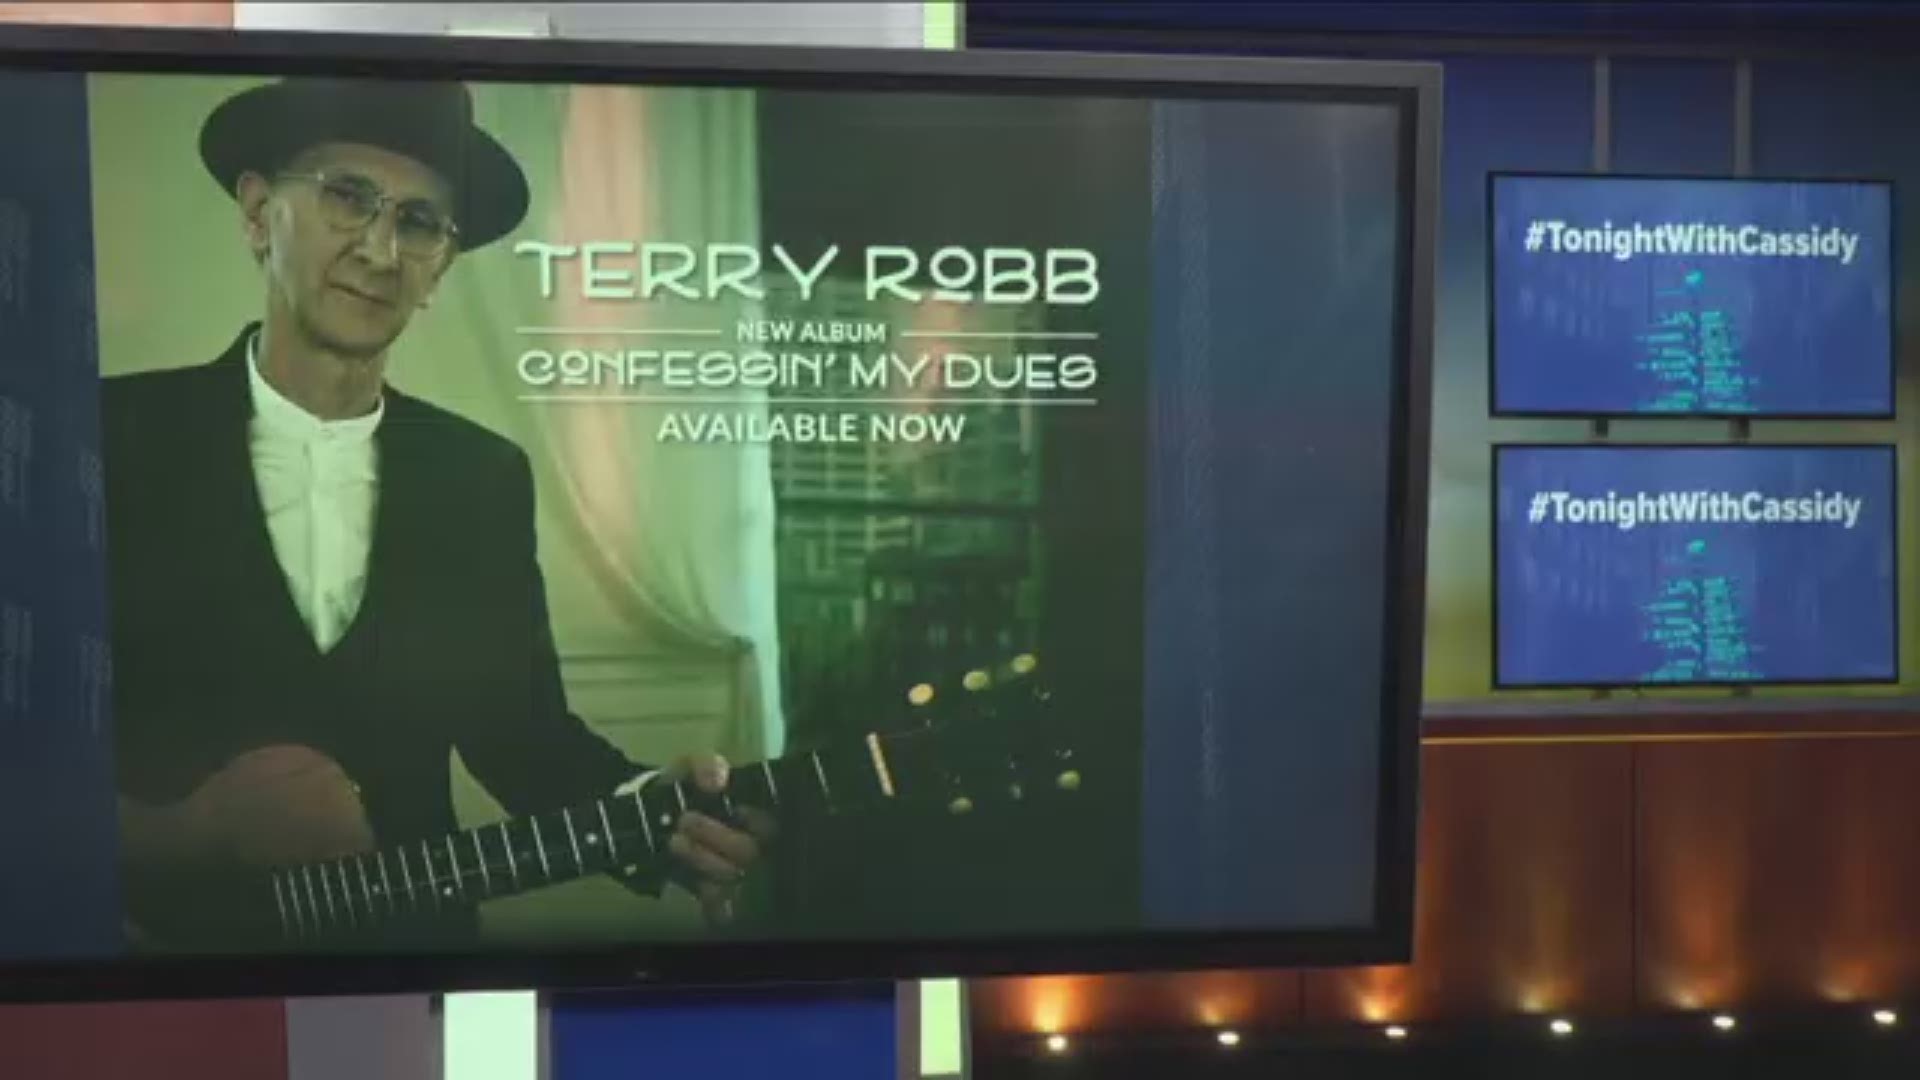 Oregon Music Hall of Fame musician Terry Robb just released his 15th solo album. You can see him play at the Waterfront Blues Festival on July 6th.
terryrobb.com
#TonightwithCassidy